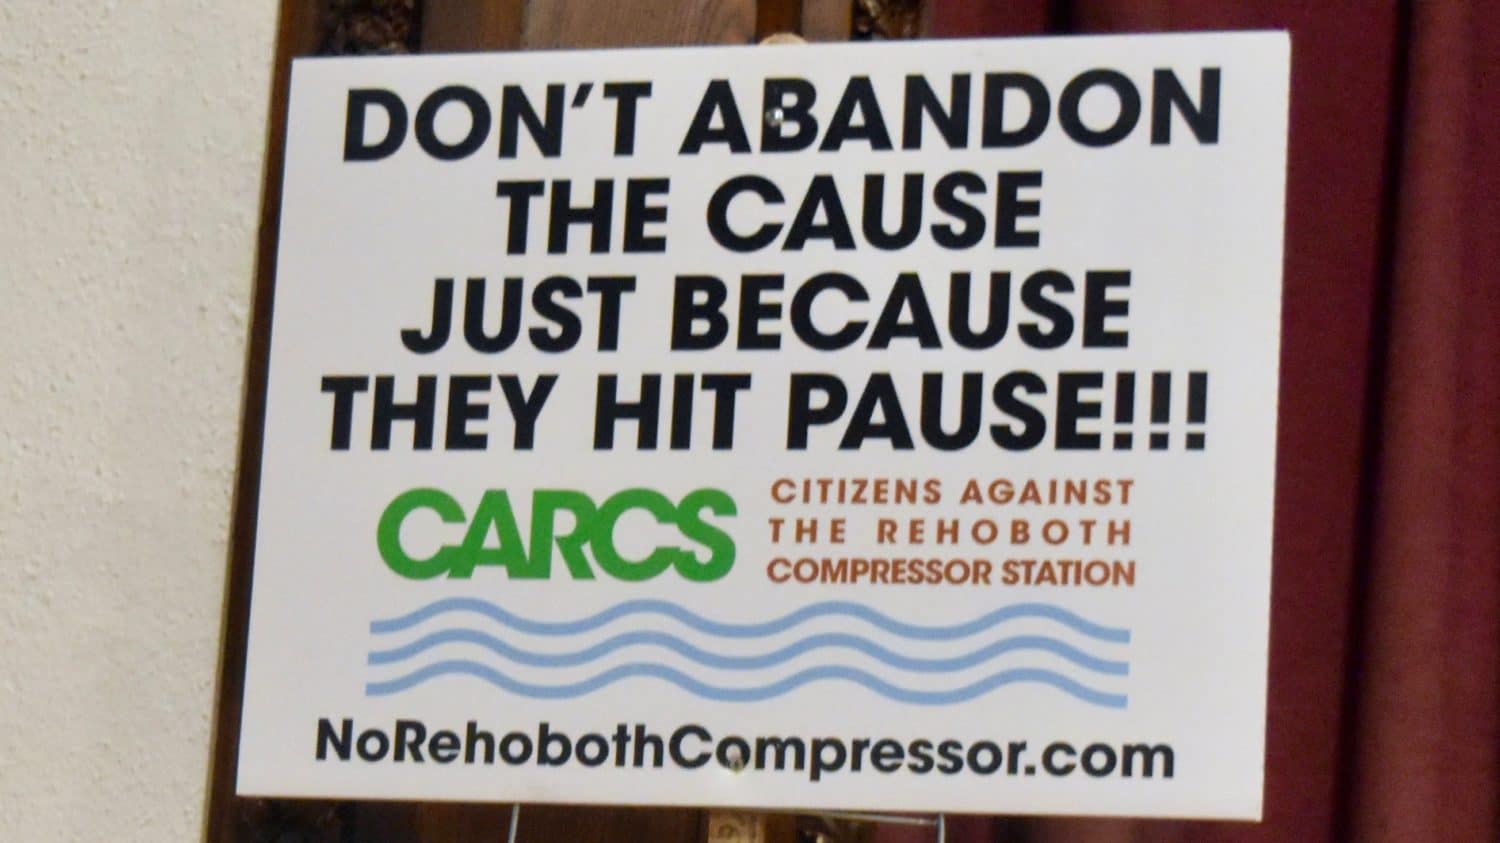 Rhode Island News: Not resting on a ‘win’ against fossil fuel compressor station, Rehoboth prepares itself for round two, with the help of elected officials